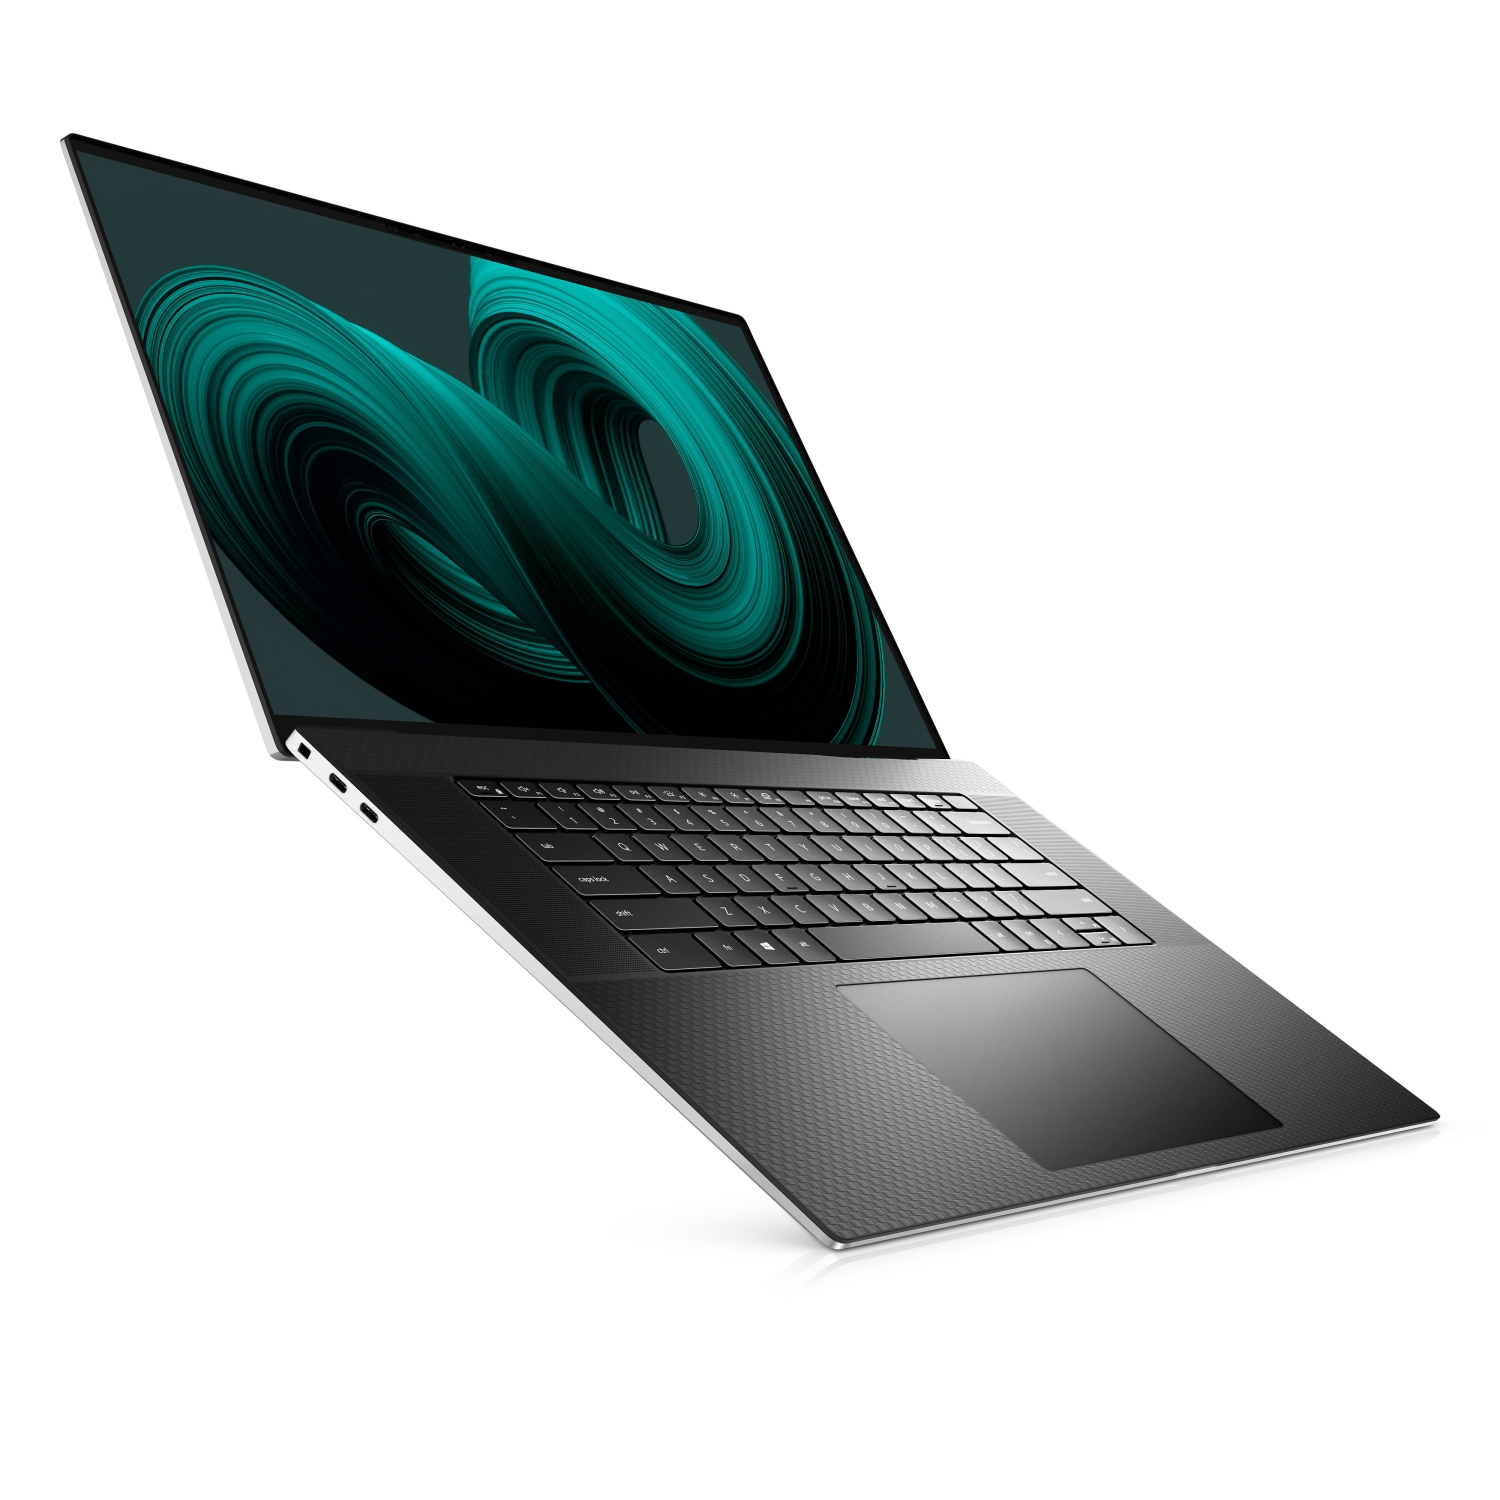 Refurbished (Excellent) - Dell XPS 17 9710 Laptop (2021), 17" 4K Touch, Core i7 - 512GB SSD - 16GB RAM - RTX 3060, 8 Cores @ 4.6 GHz - 11th Gen CPU Certified Refurbished